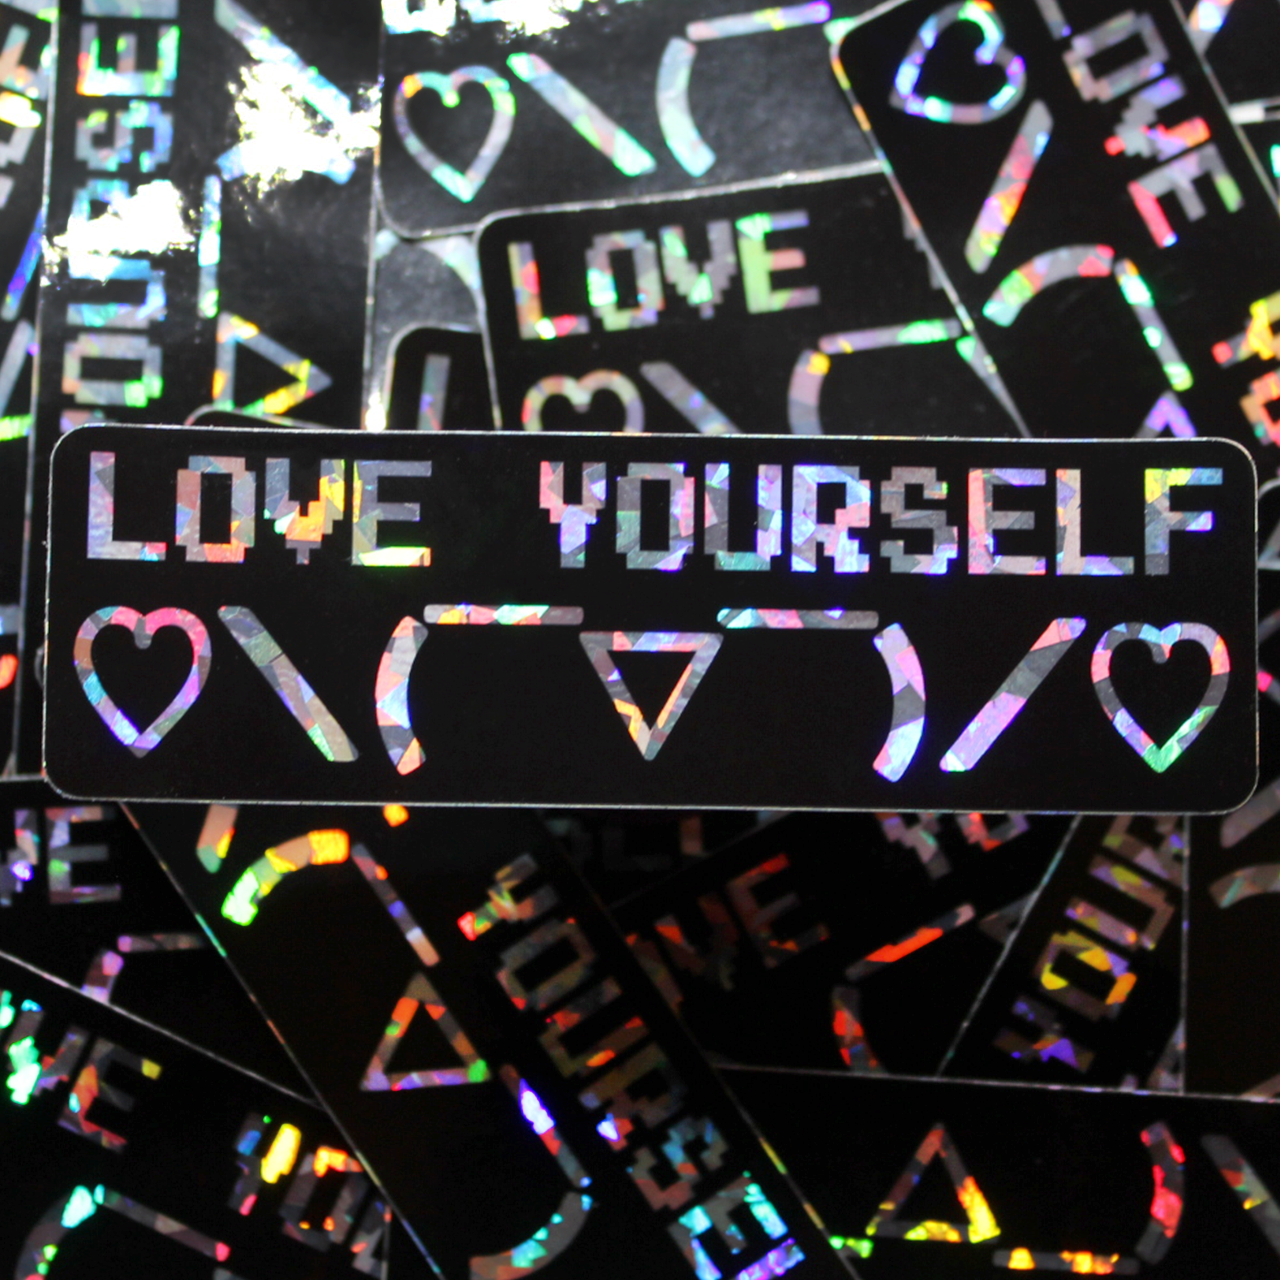 5" x 1" 1/2 holographic love yourself sticker with cute emoticon